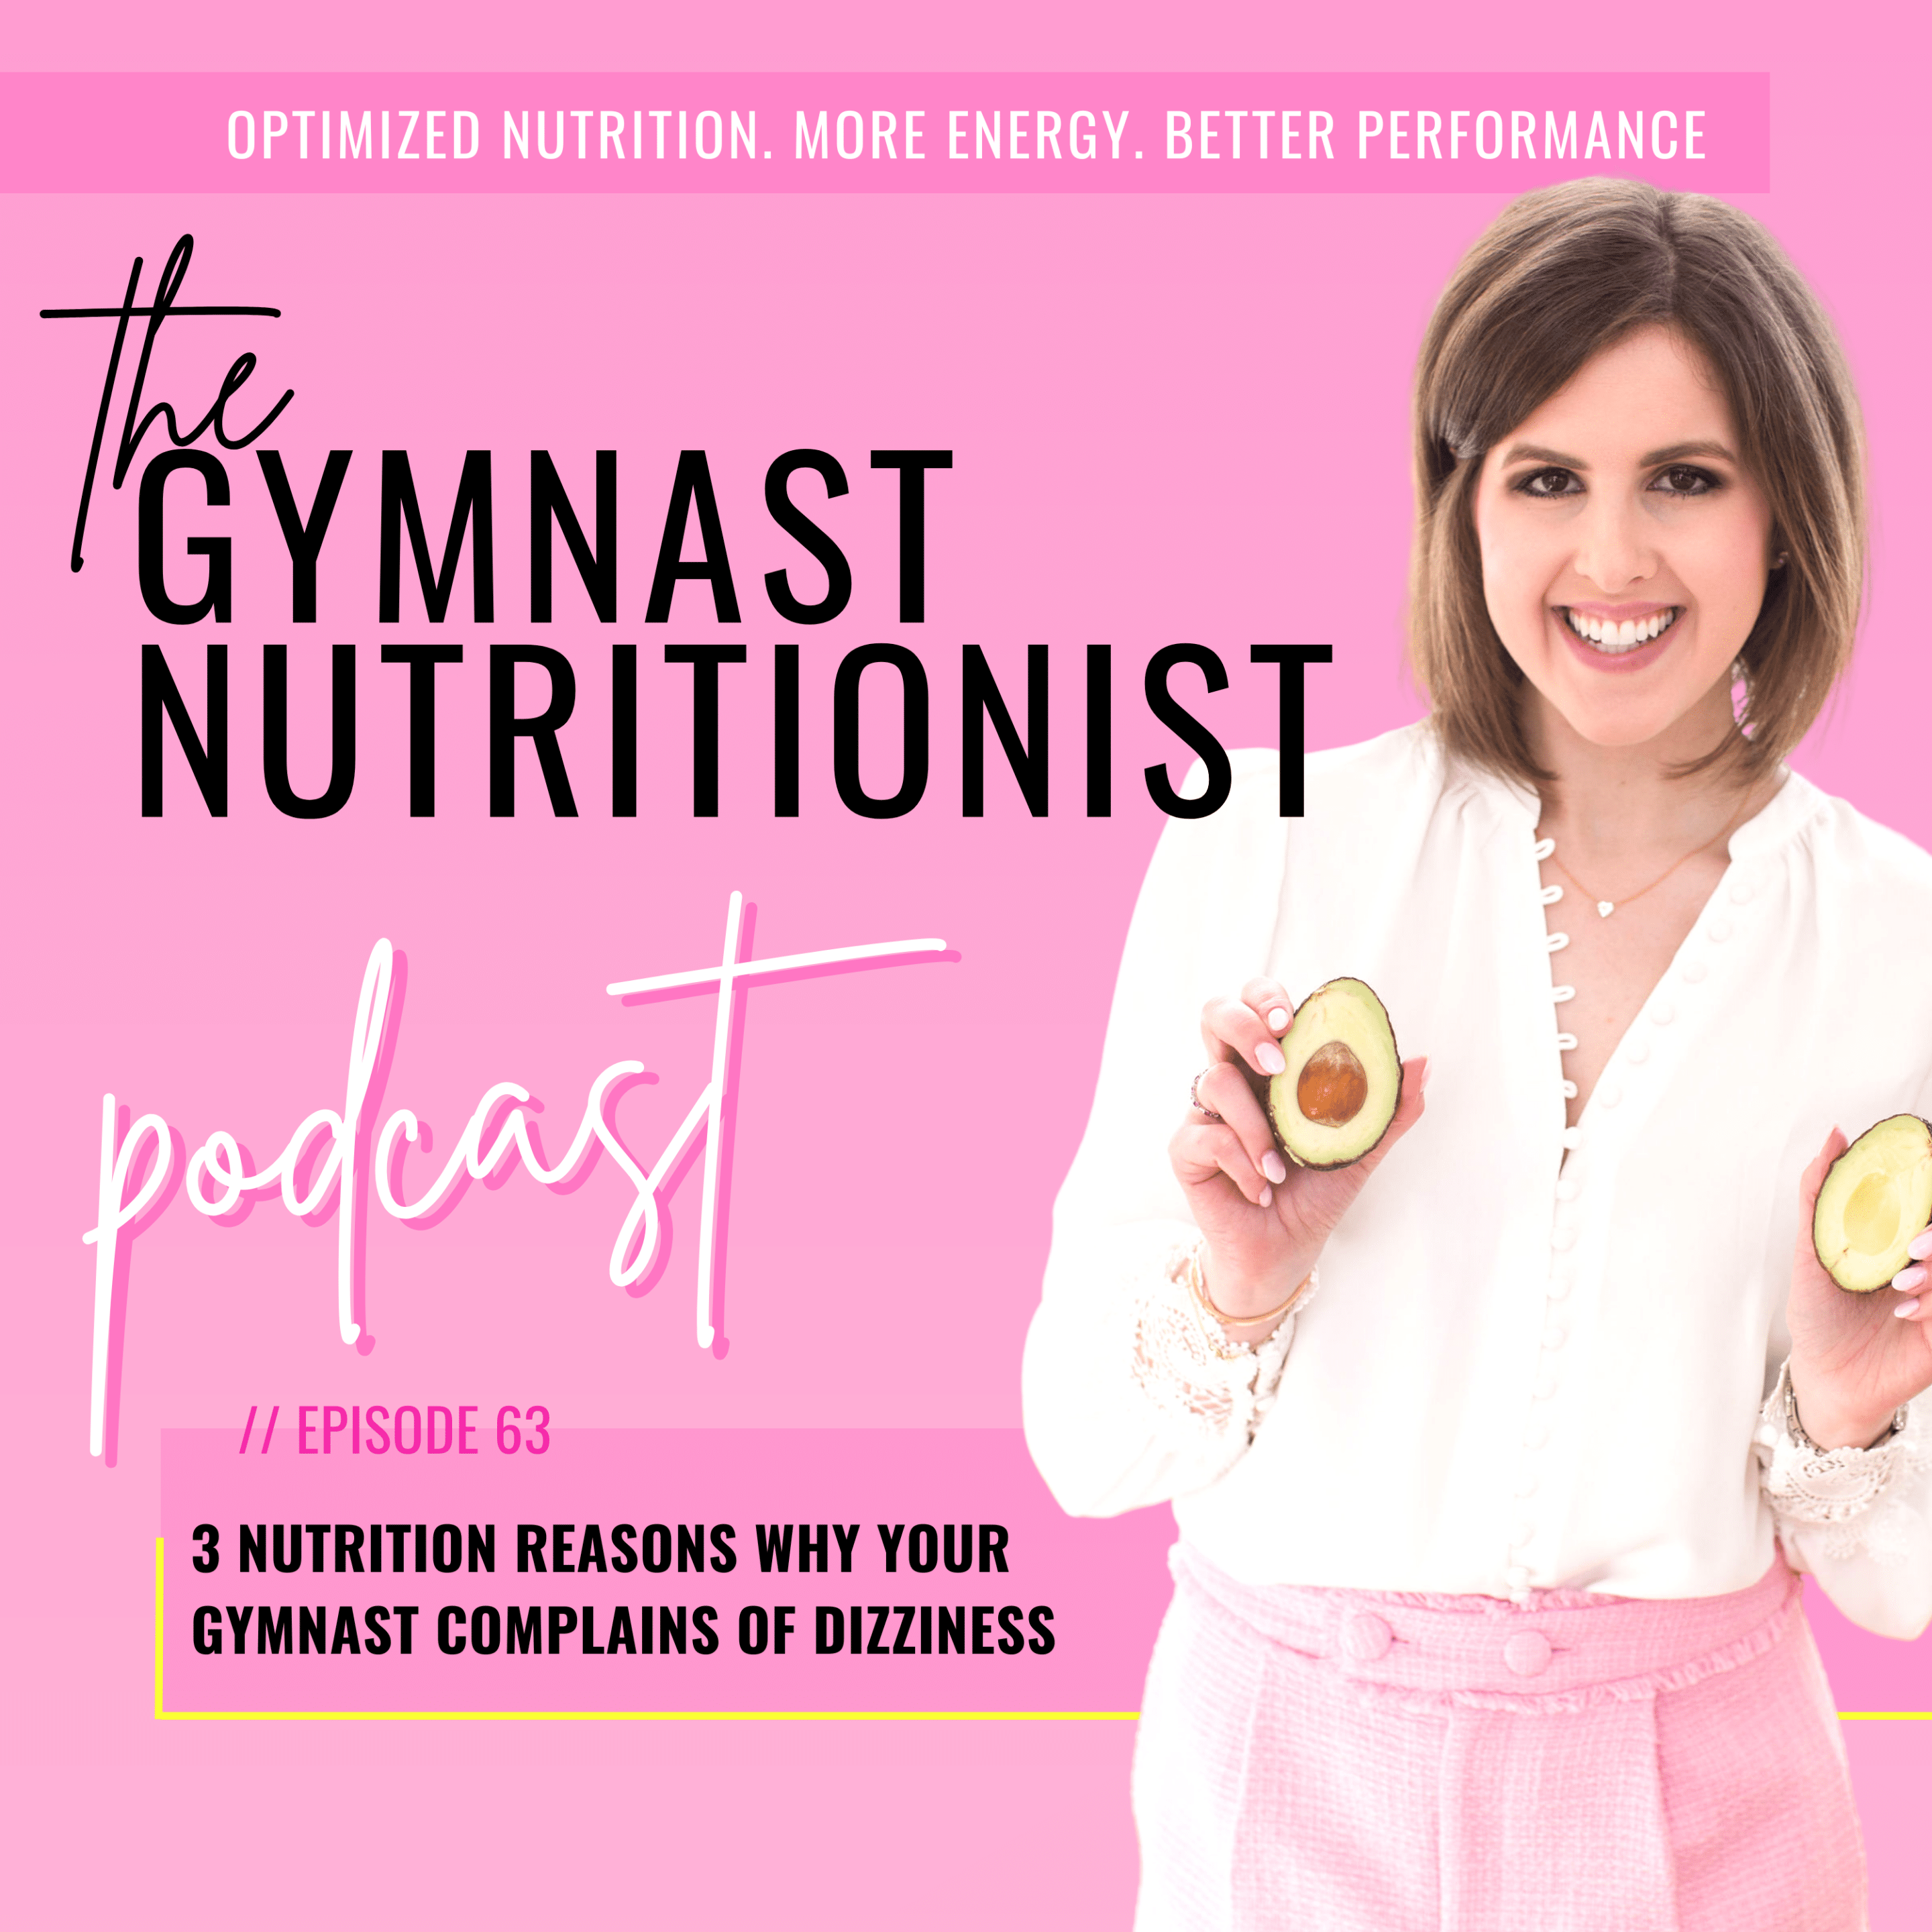 Episode 63: 3 Nutrition Reasons Why Your Gymnast Complains of Dizziness